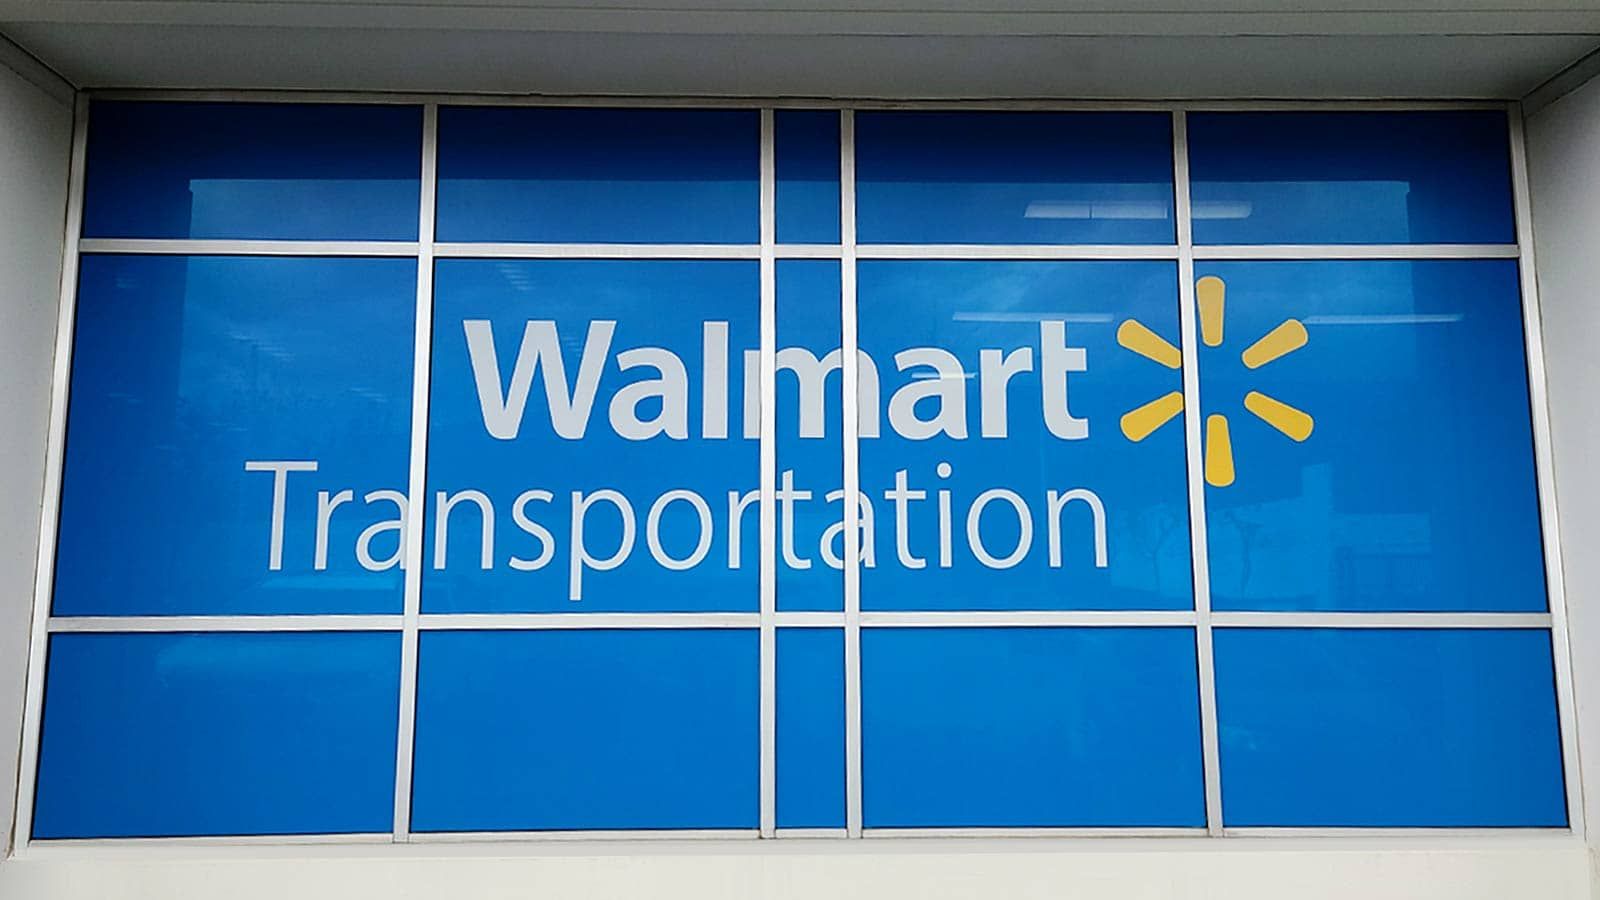 Walmart window decals applied to the storefront